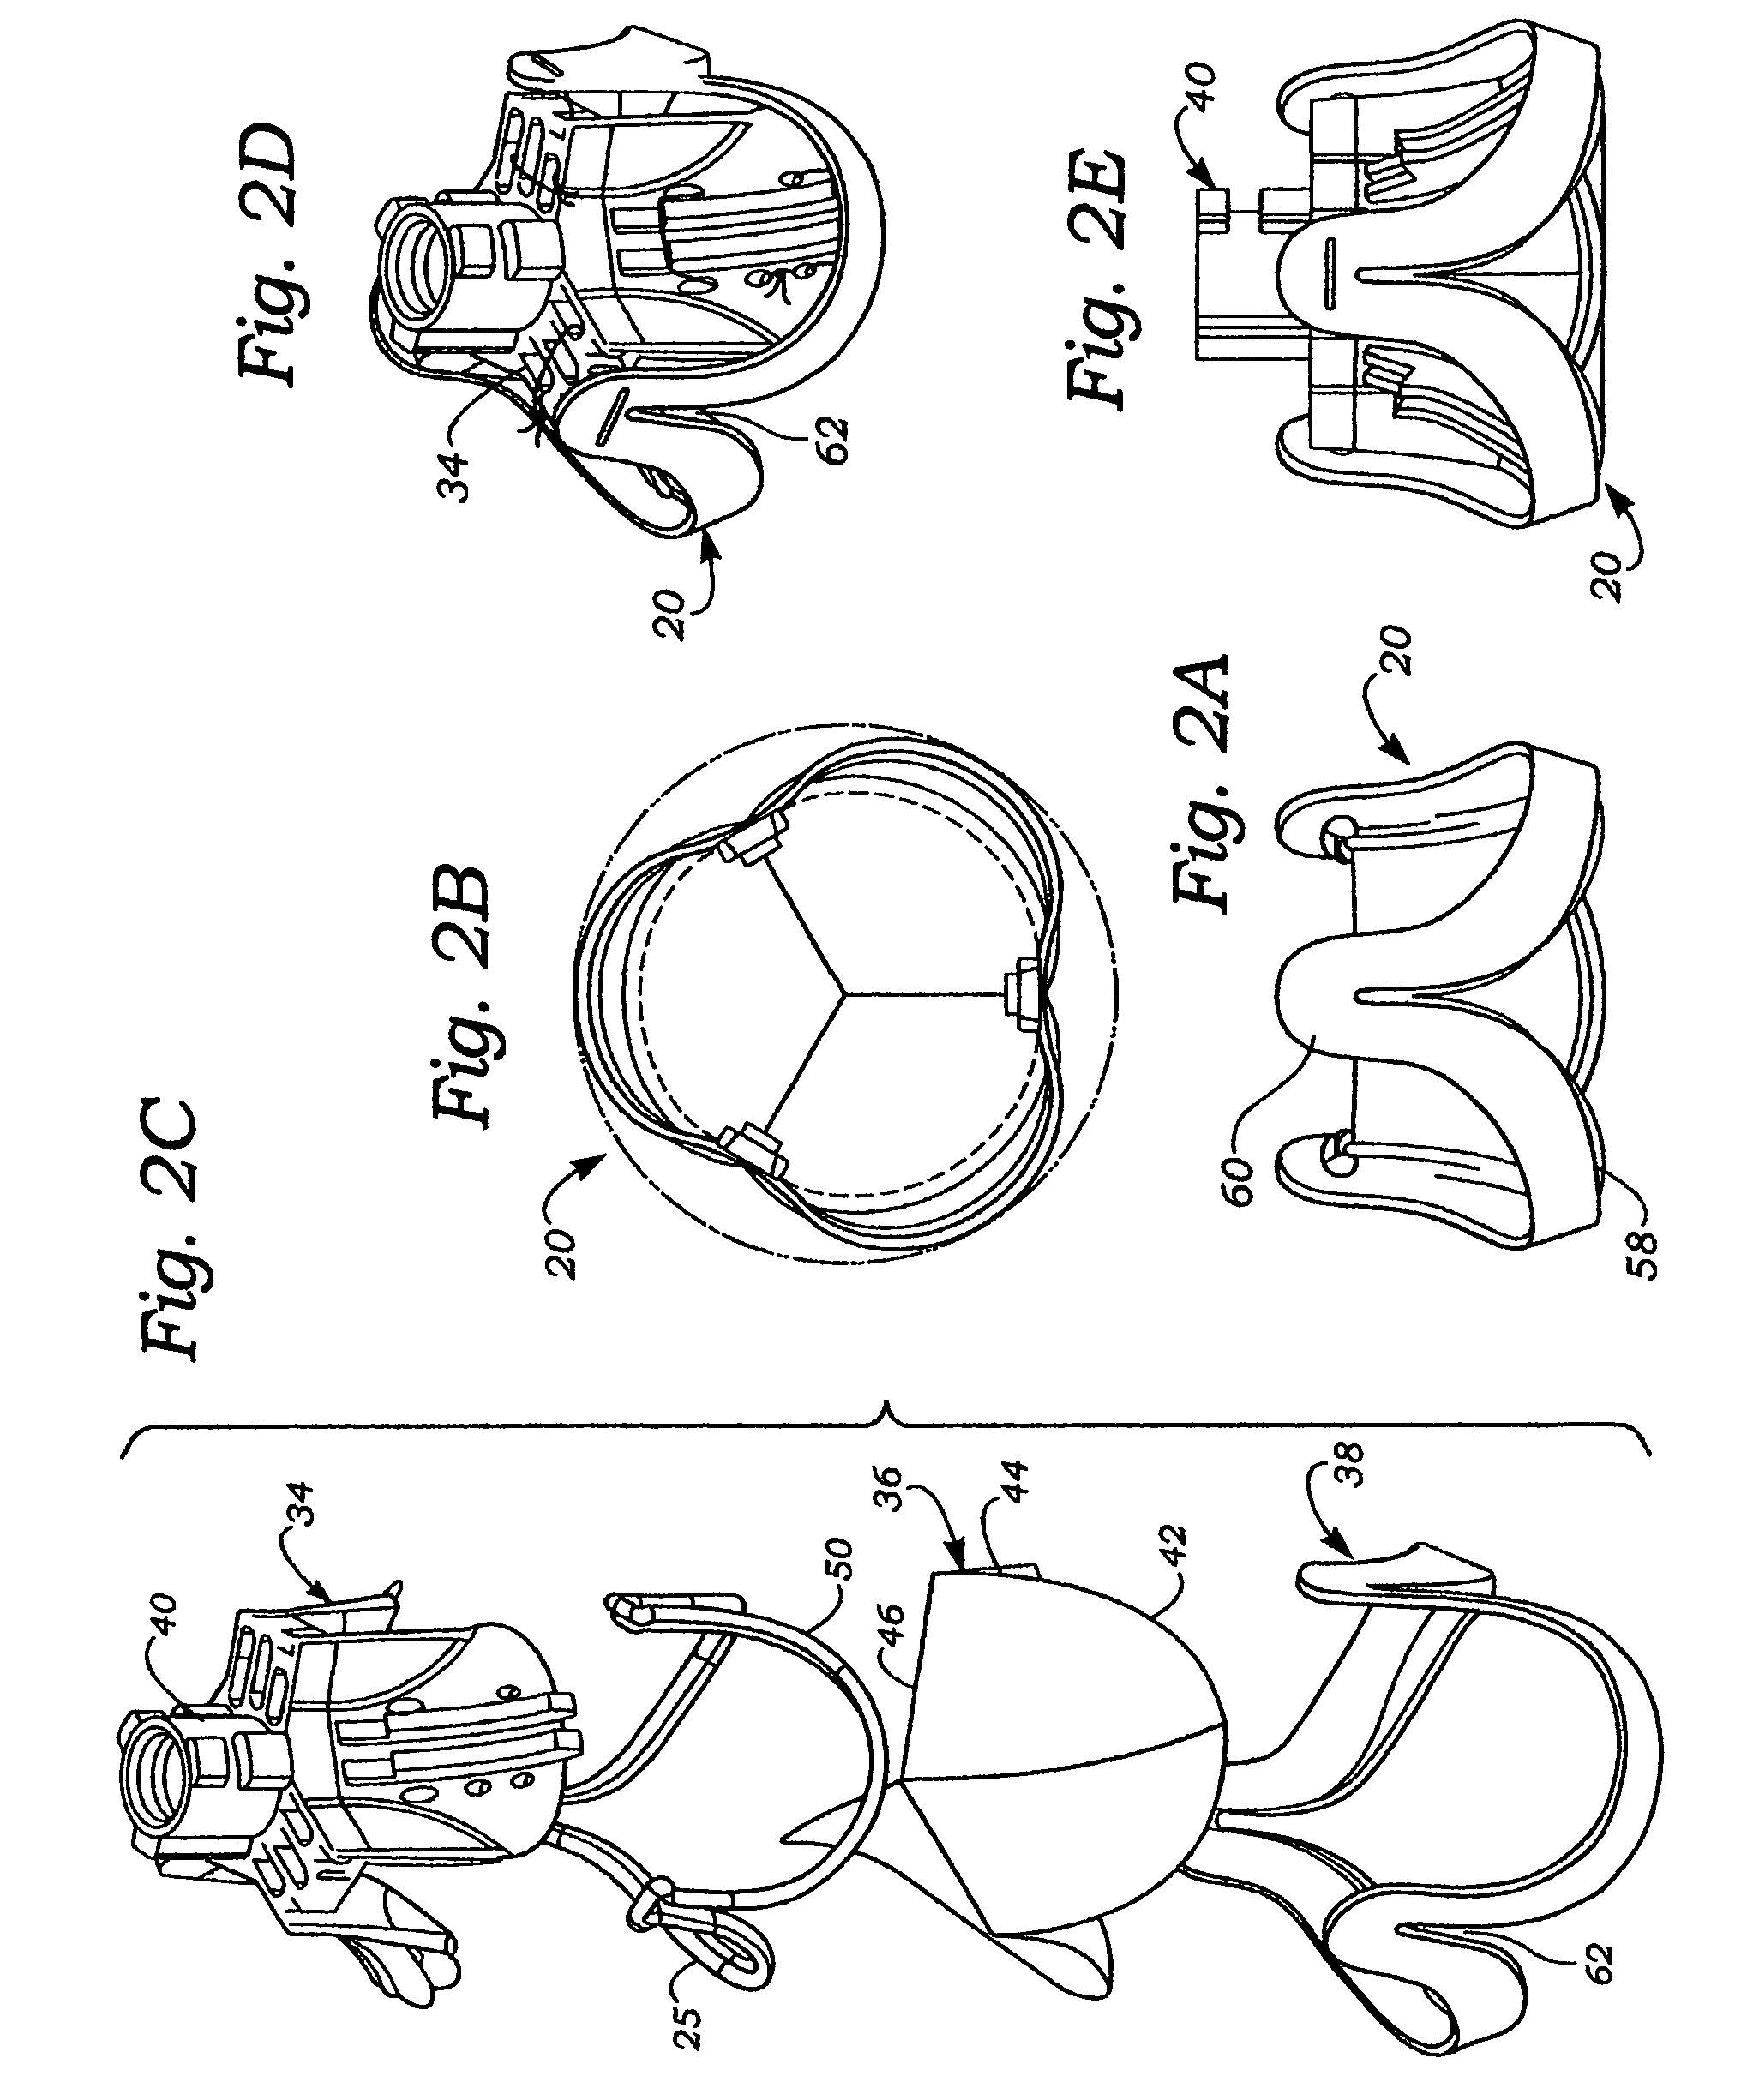 Continuous heart valve support frame and method of manufacture